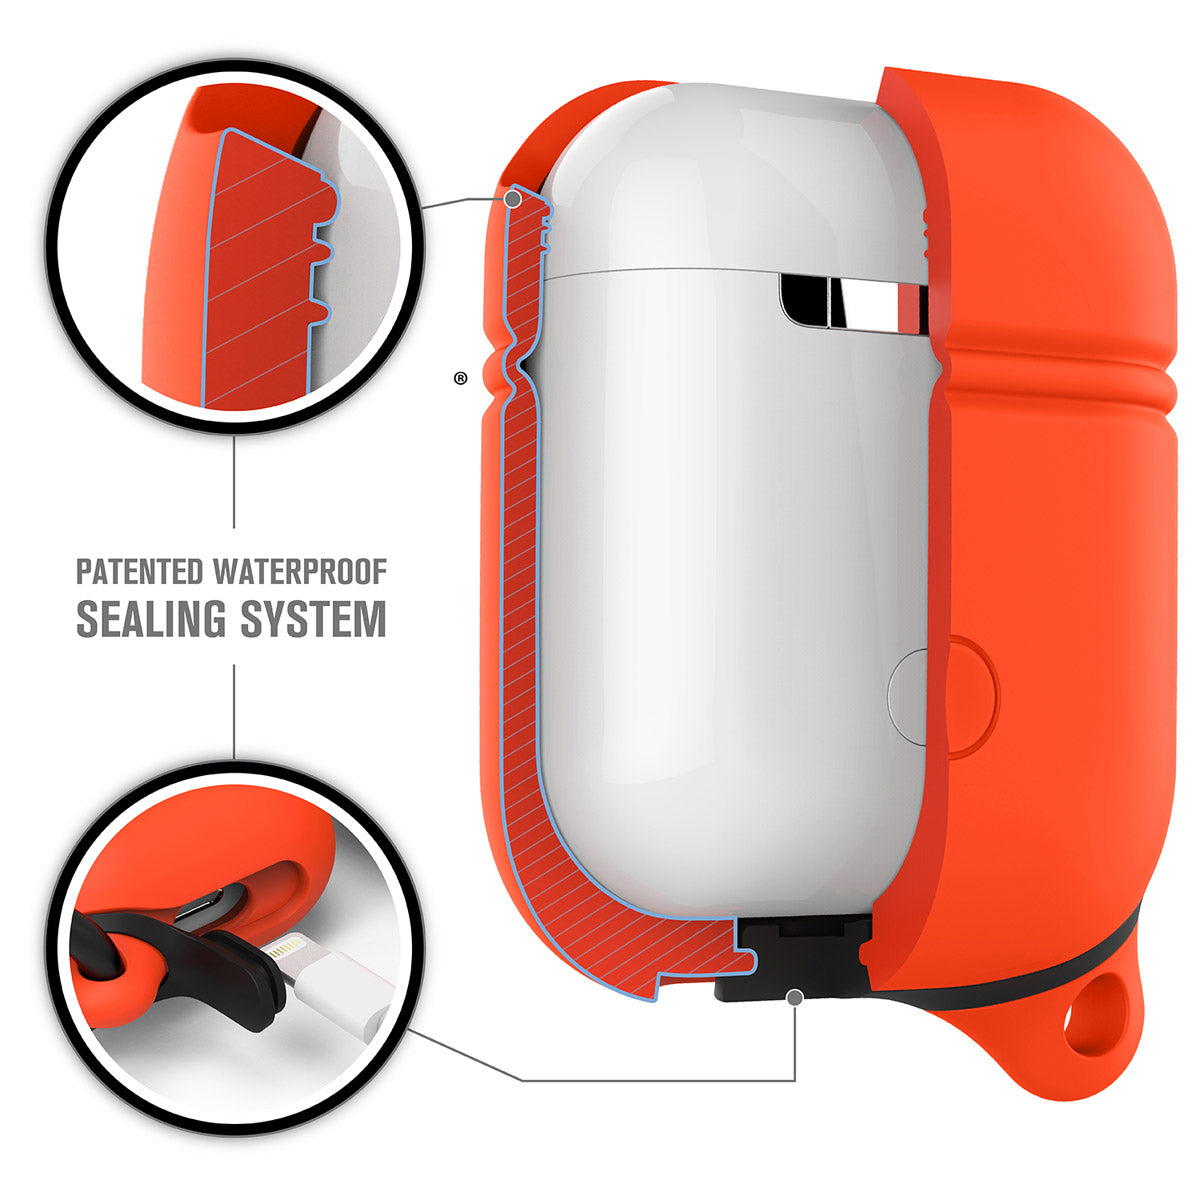 CATAPDSUN | Catalyst airpods gen2/1 waterproof case + carabiner showing the inner materials of the case in sunset text reads patented waterproof sealing system